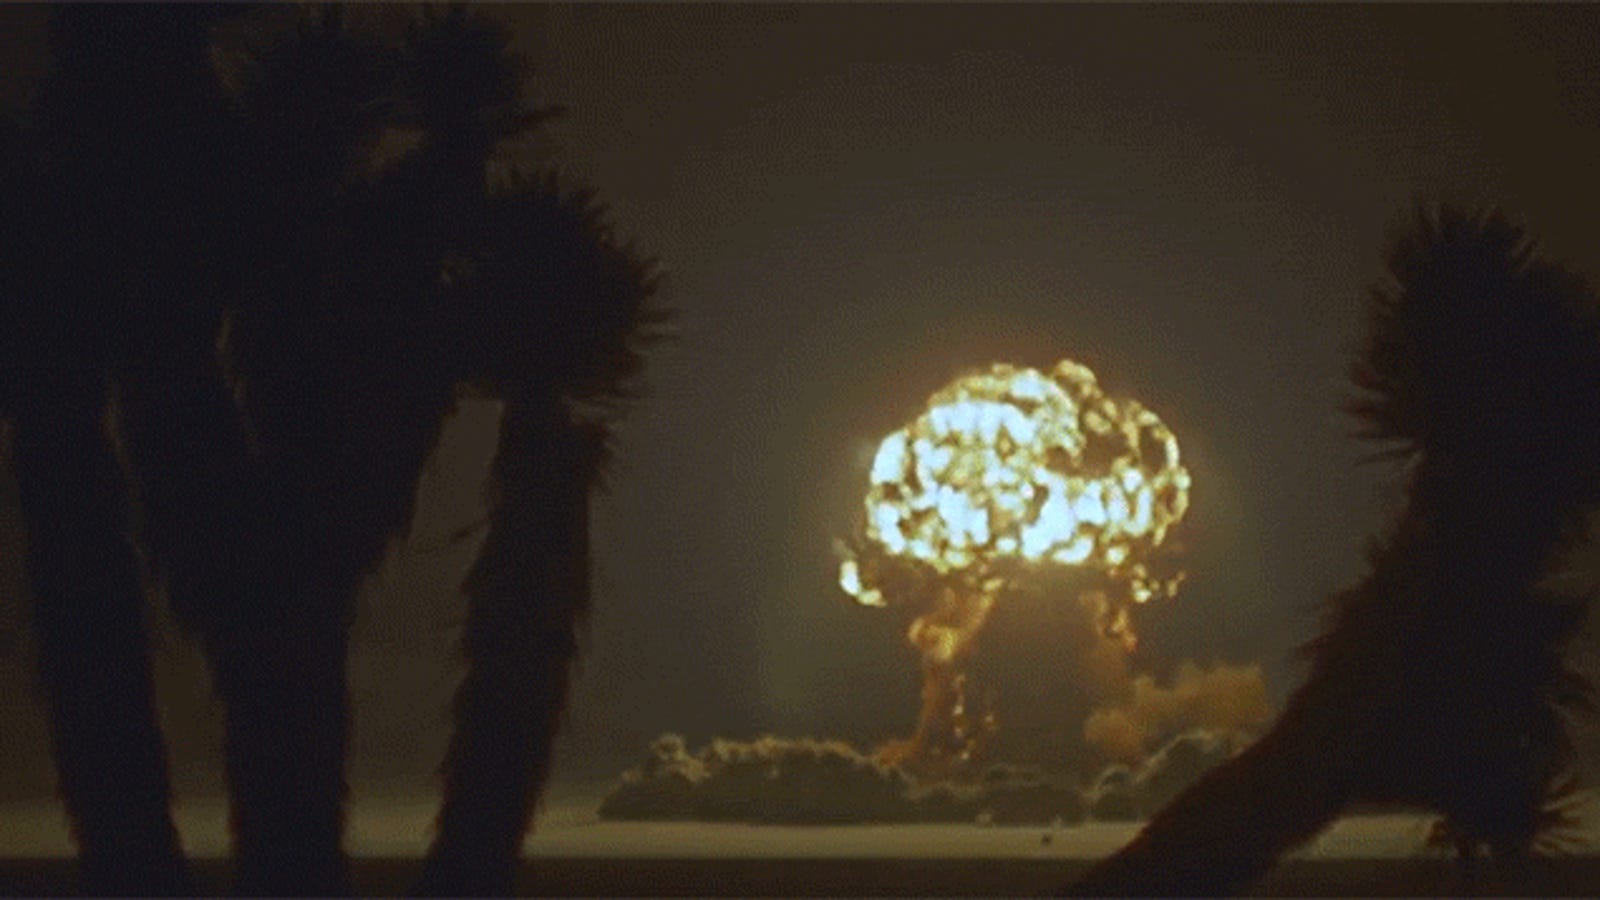 Watch previously unreleased footage of 1955 atomic bomb testing in